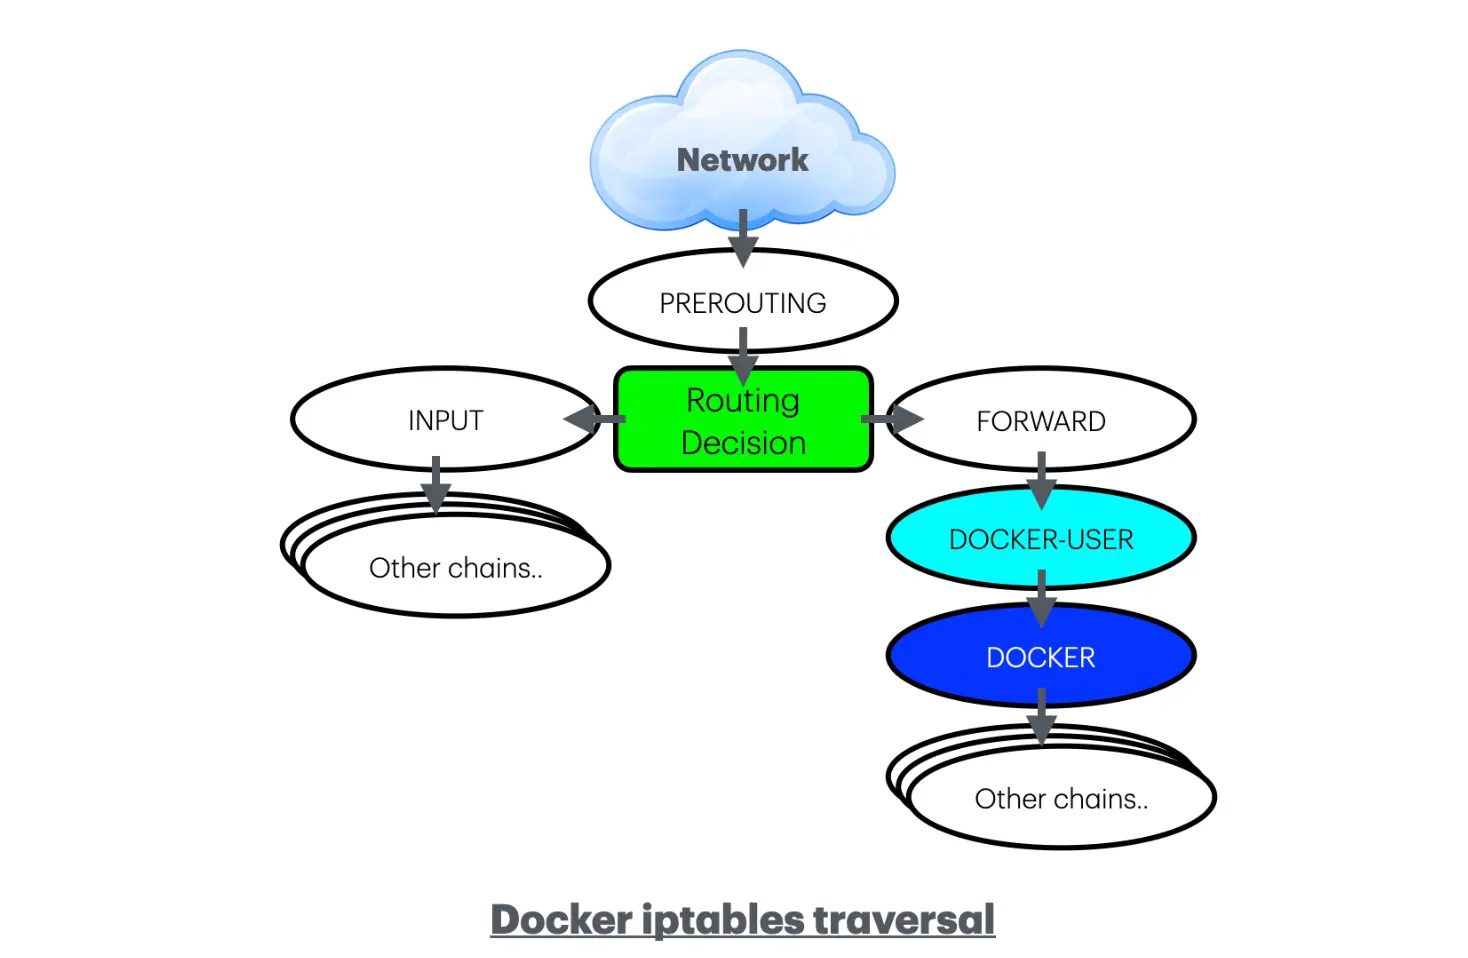 Docker iptables traversal. A cloud shape labeled “network” sits at the top of a block diagram. An arrow points down from it to a block reading “prerouting”. The “PREROUTING” block points down at a green block reading “routing decision”. This block has two outward arrows, one to the left and one to the right. The arrow to the left points at a block labeled “INPUT” which itself points down at several stacked blocks labeled “other chains…”. The arrow to the right points at a block reading “FORWARD”, which points down to a block labeled “DOCKER-USER”, which points down to a block labeled “DOCKER”, which points down to a block labeled “other chains…